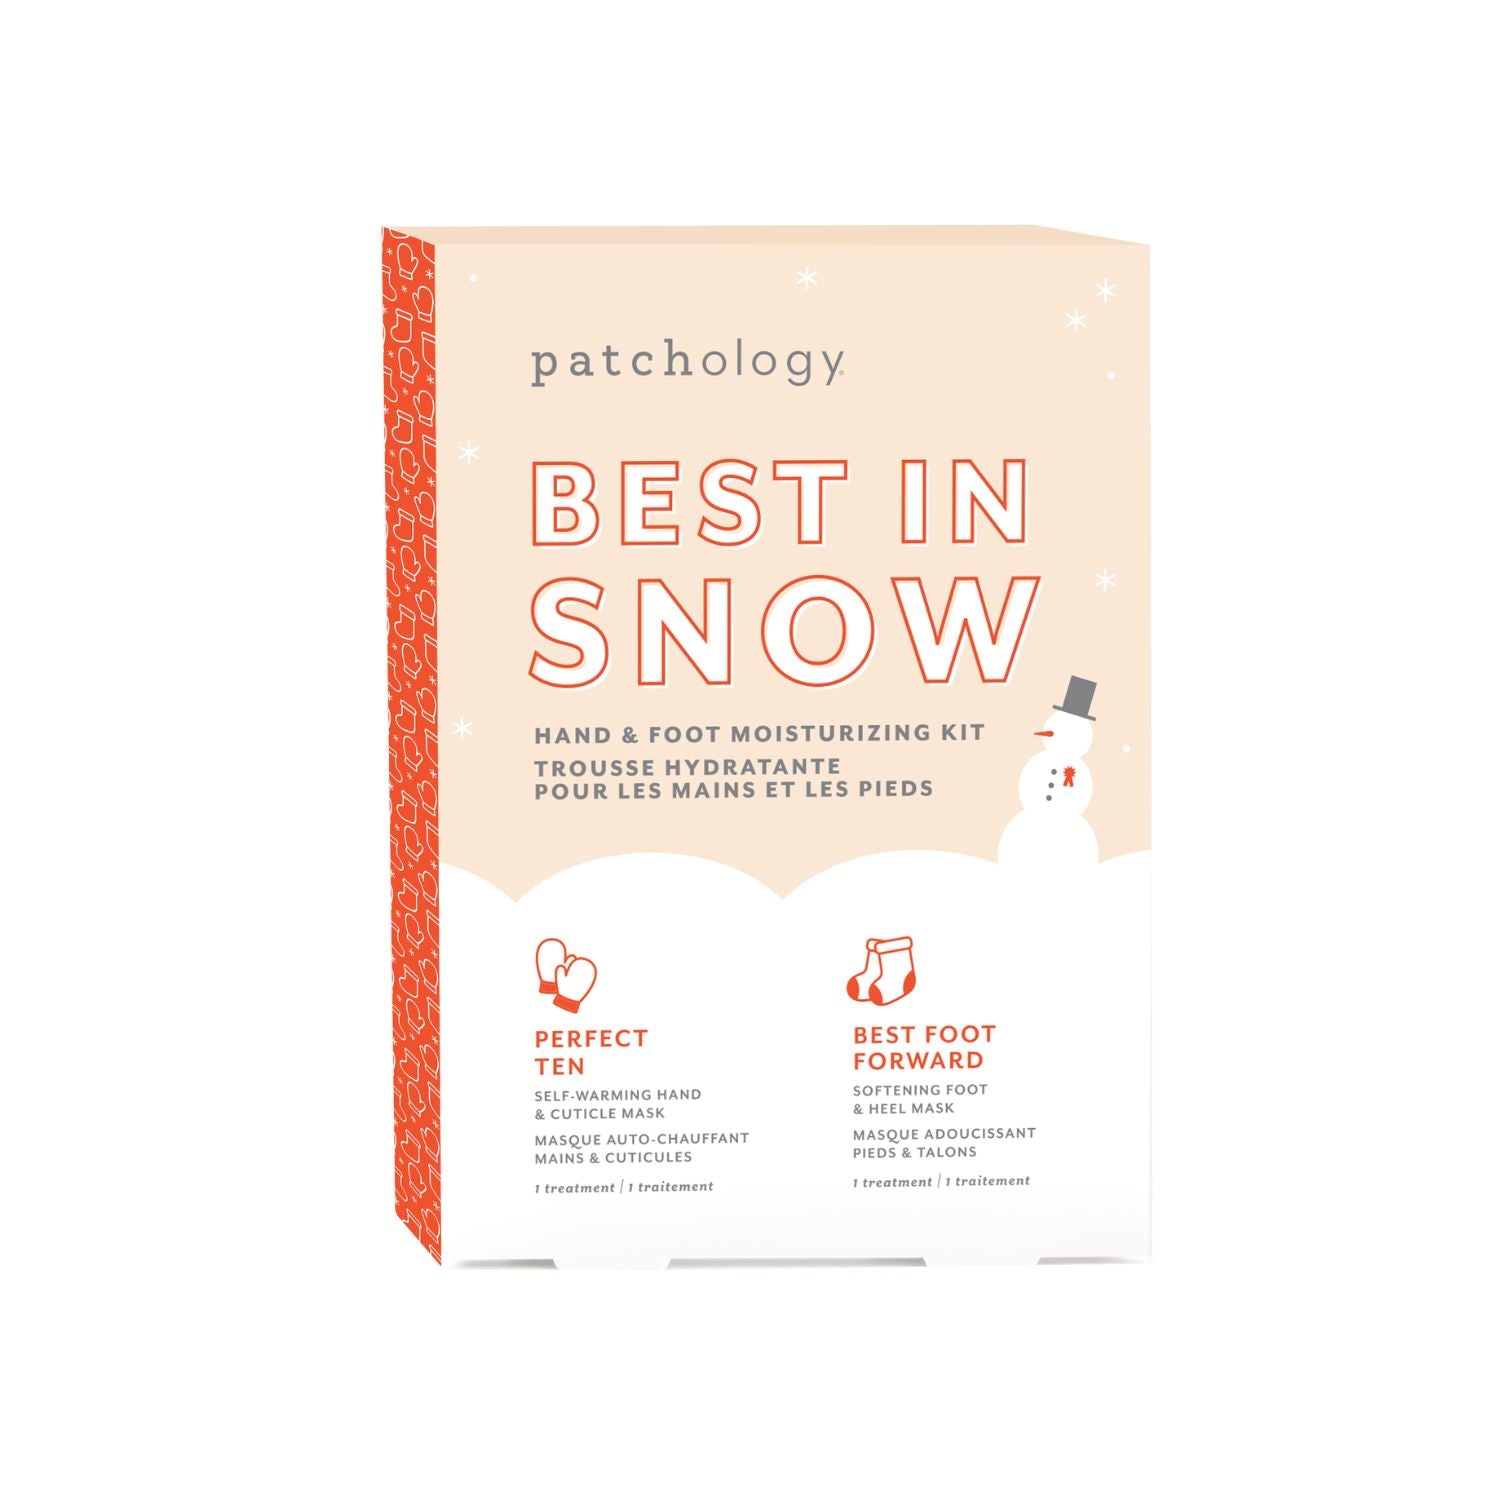 Patchology Best In Snow Holiday Kit Gift Set 1 Shaws Department Stores